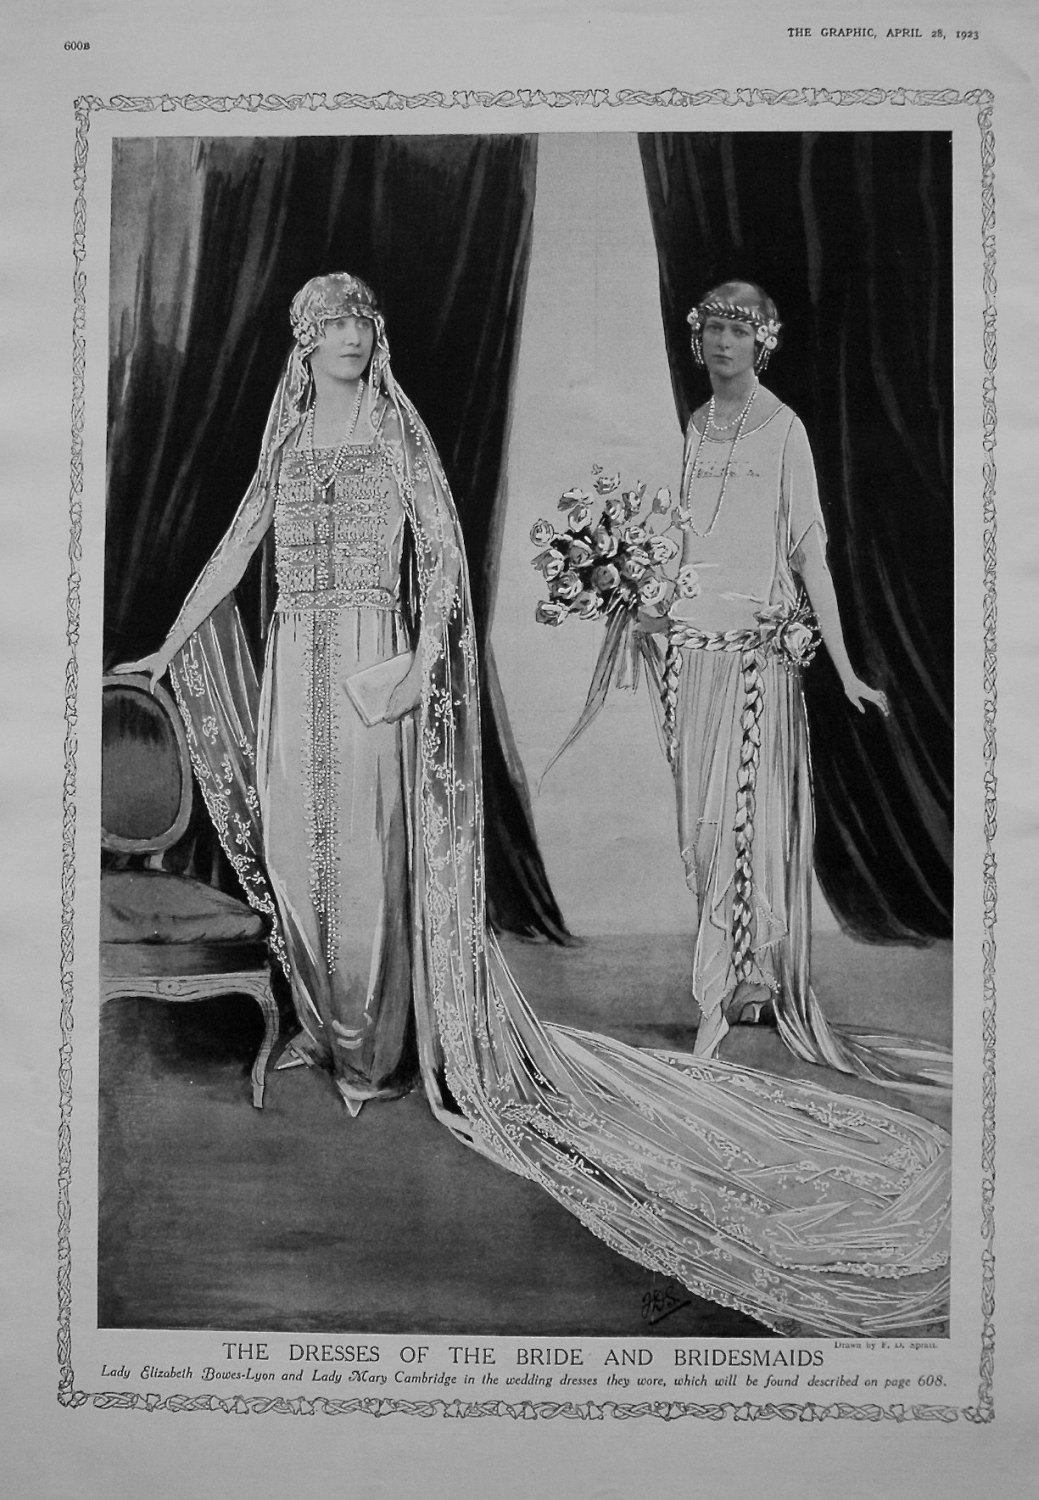 Dresses of the Bride and Bridesmaid. (For the Wedding of The Duke of York a